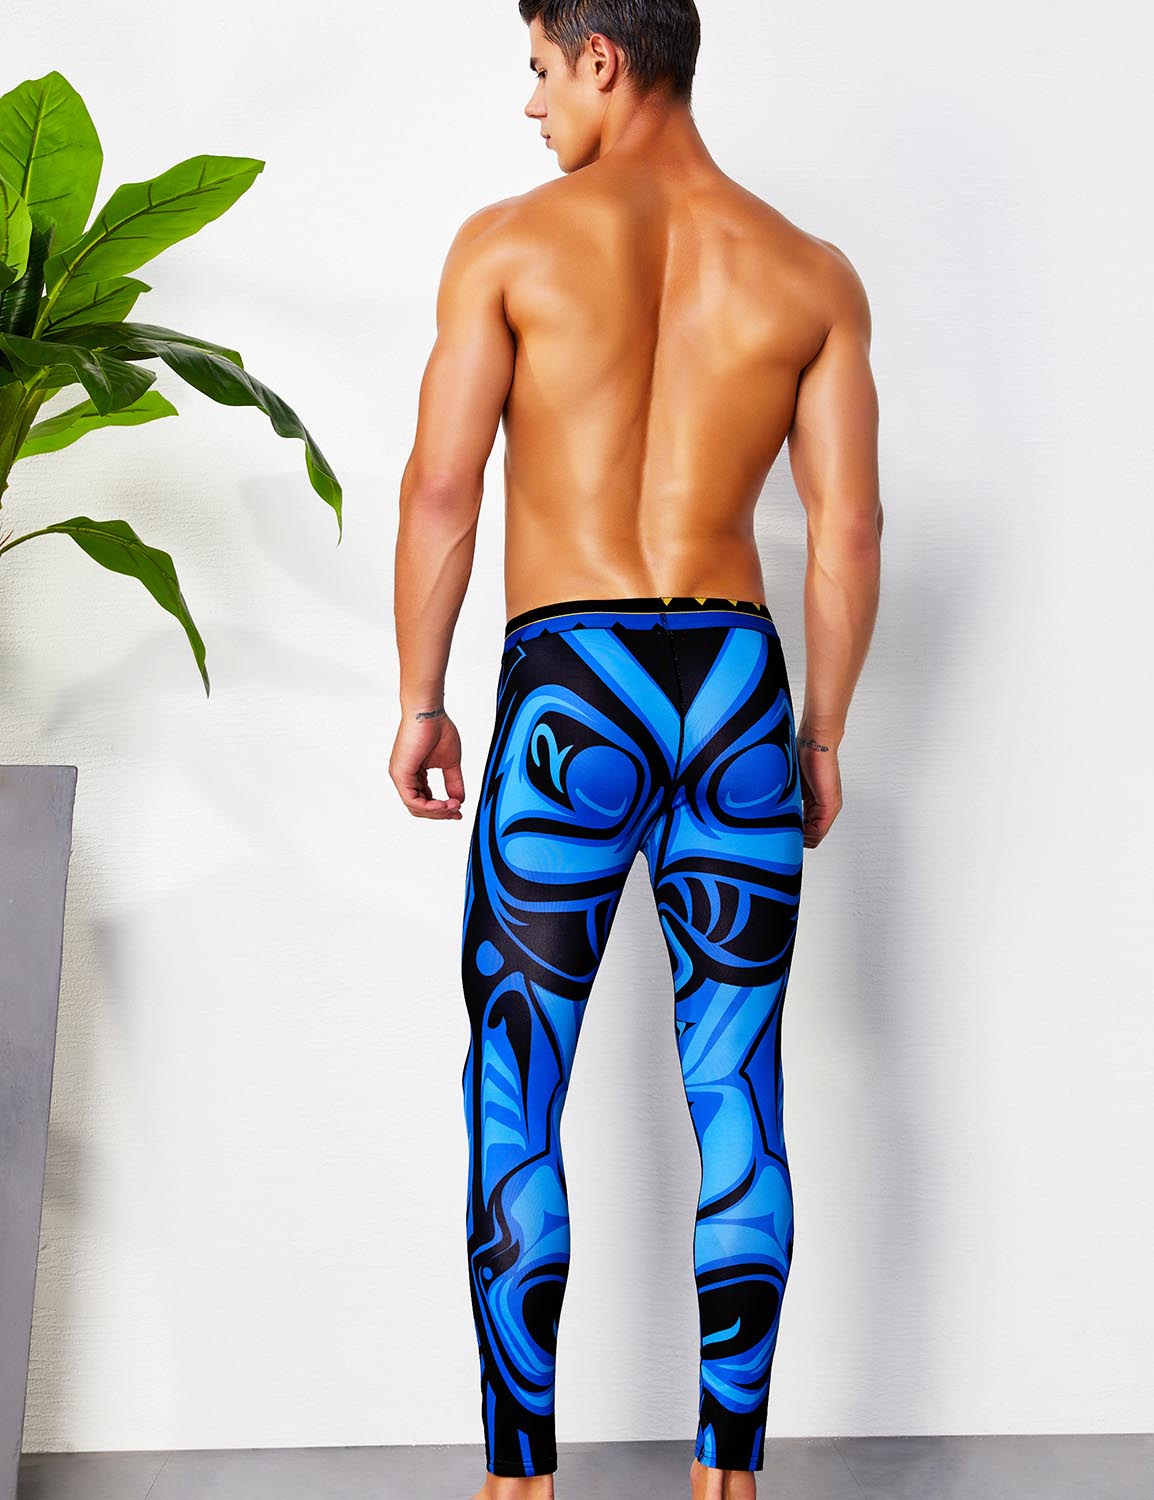 Gay Leggings  TAUWELL Activewear Gym Compression Leggings